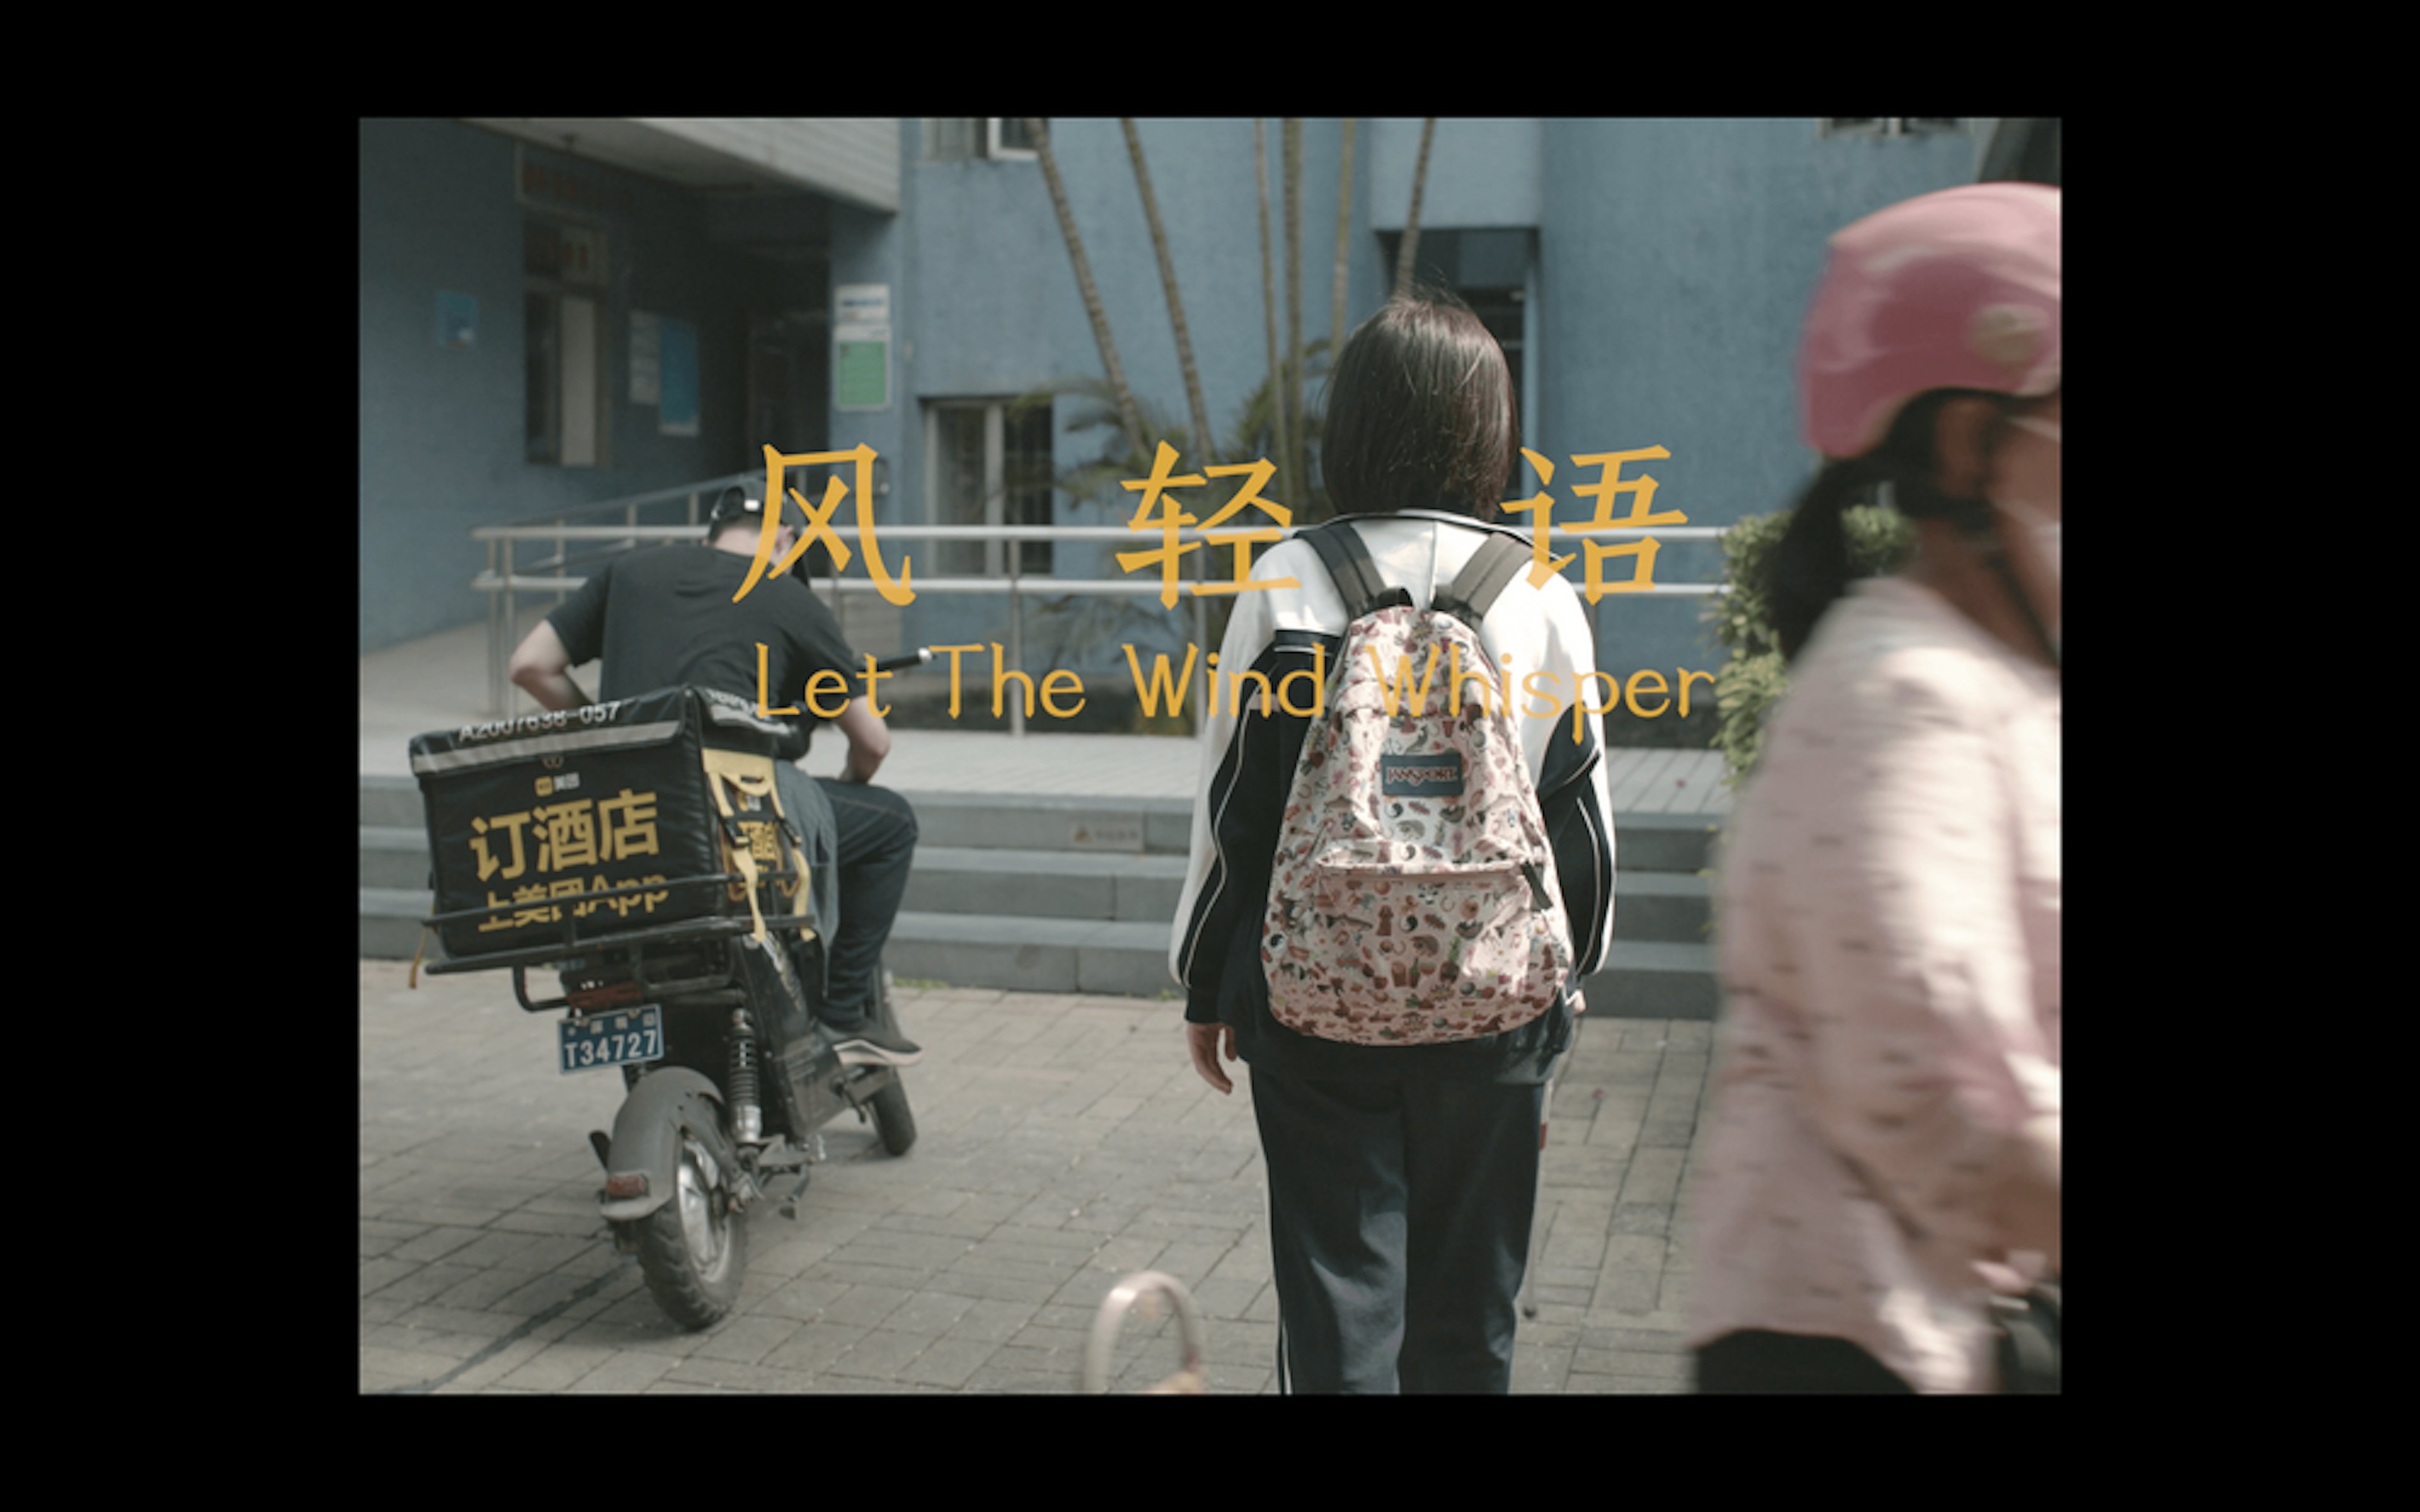 film still showing a child from the back, wearing a backpack and a person on a motorbike beside them. Another child's half body can be seen in the frame. on the image is written: Let The Wind Whisper